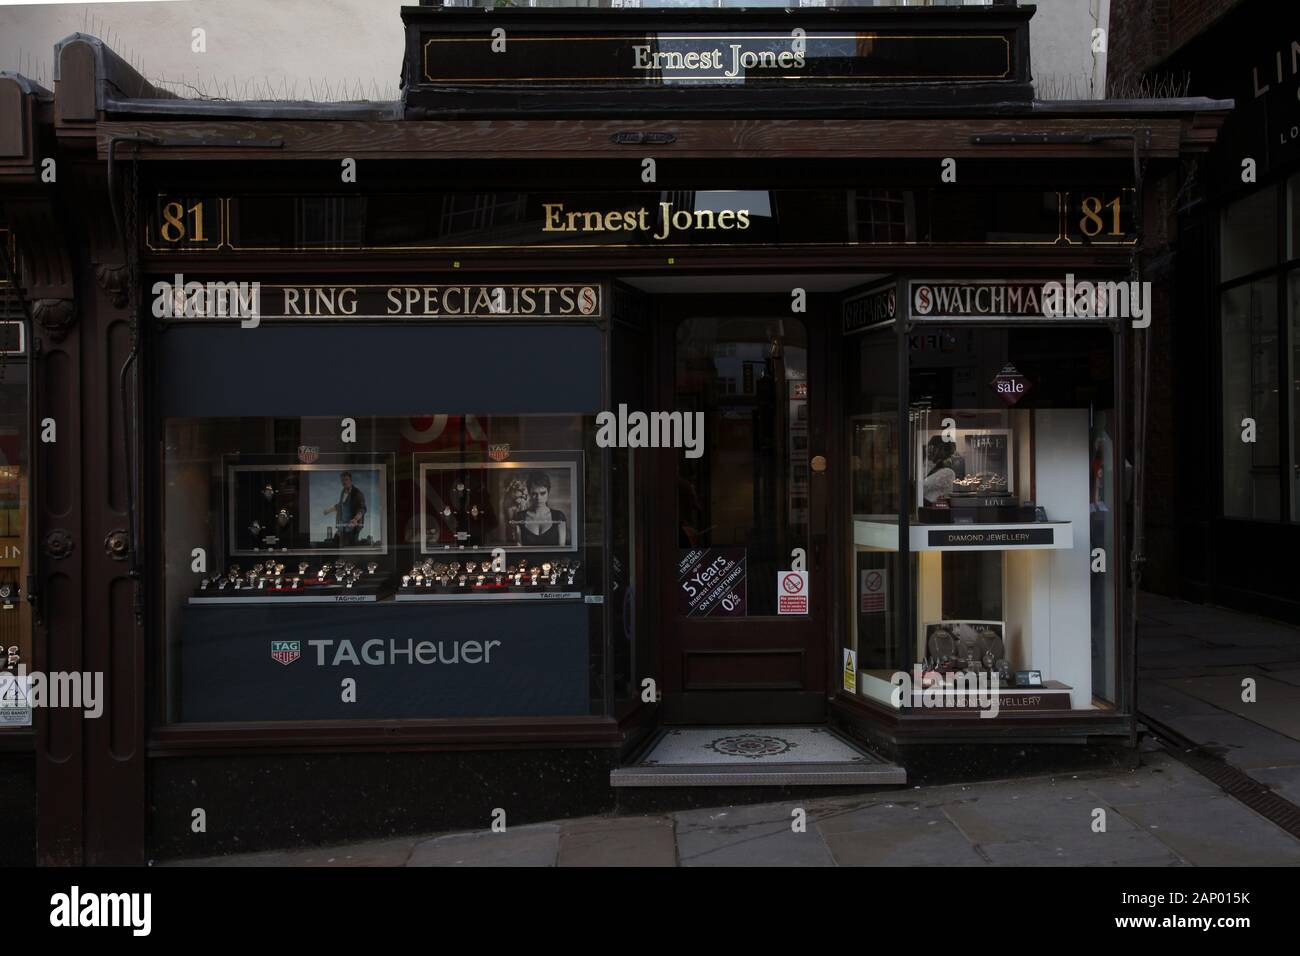 Earnest Jones jewellers store front at 81 High Street in Guildford, Surrey, UK, January 2020 Stock Photo